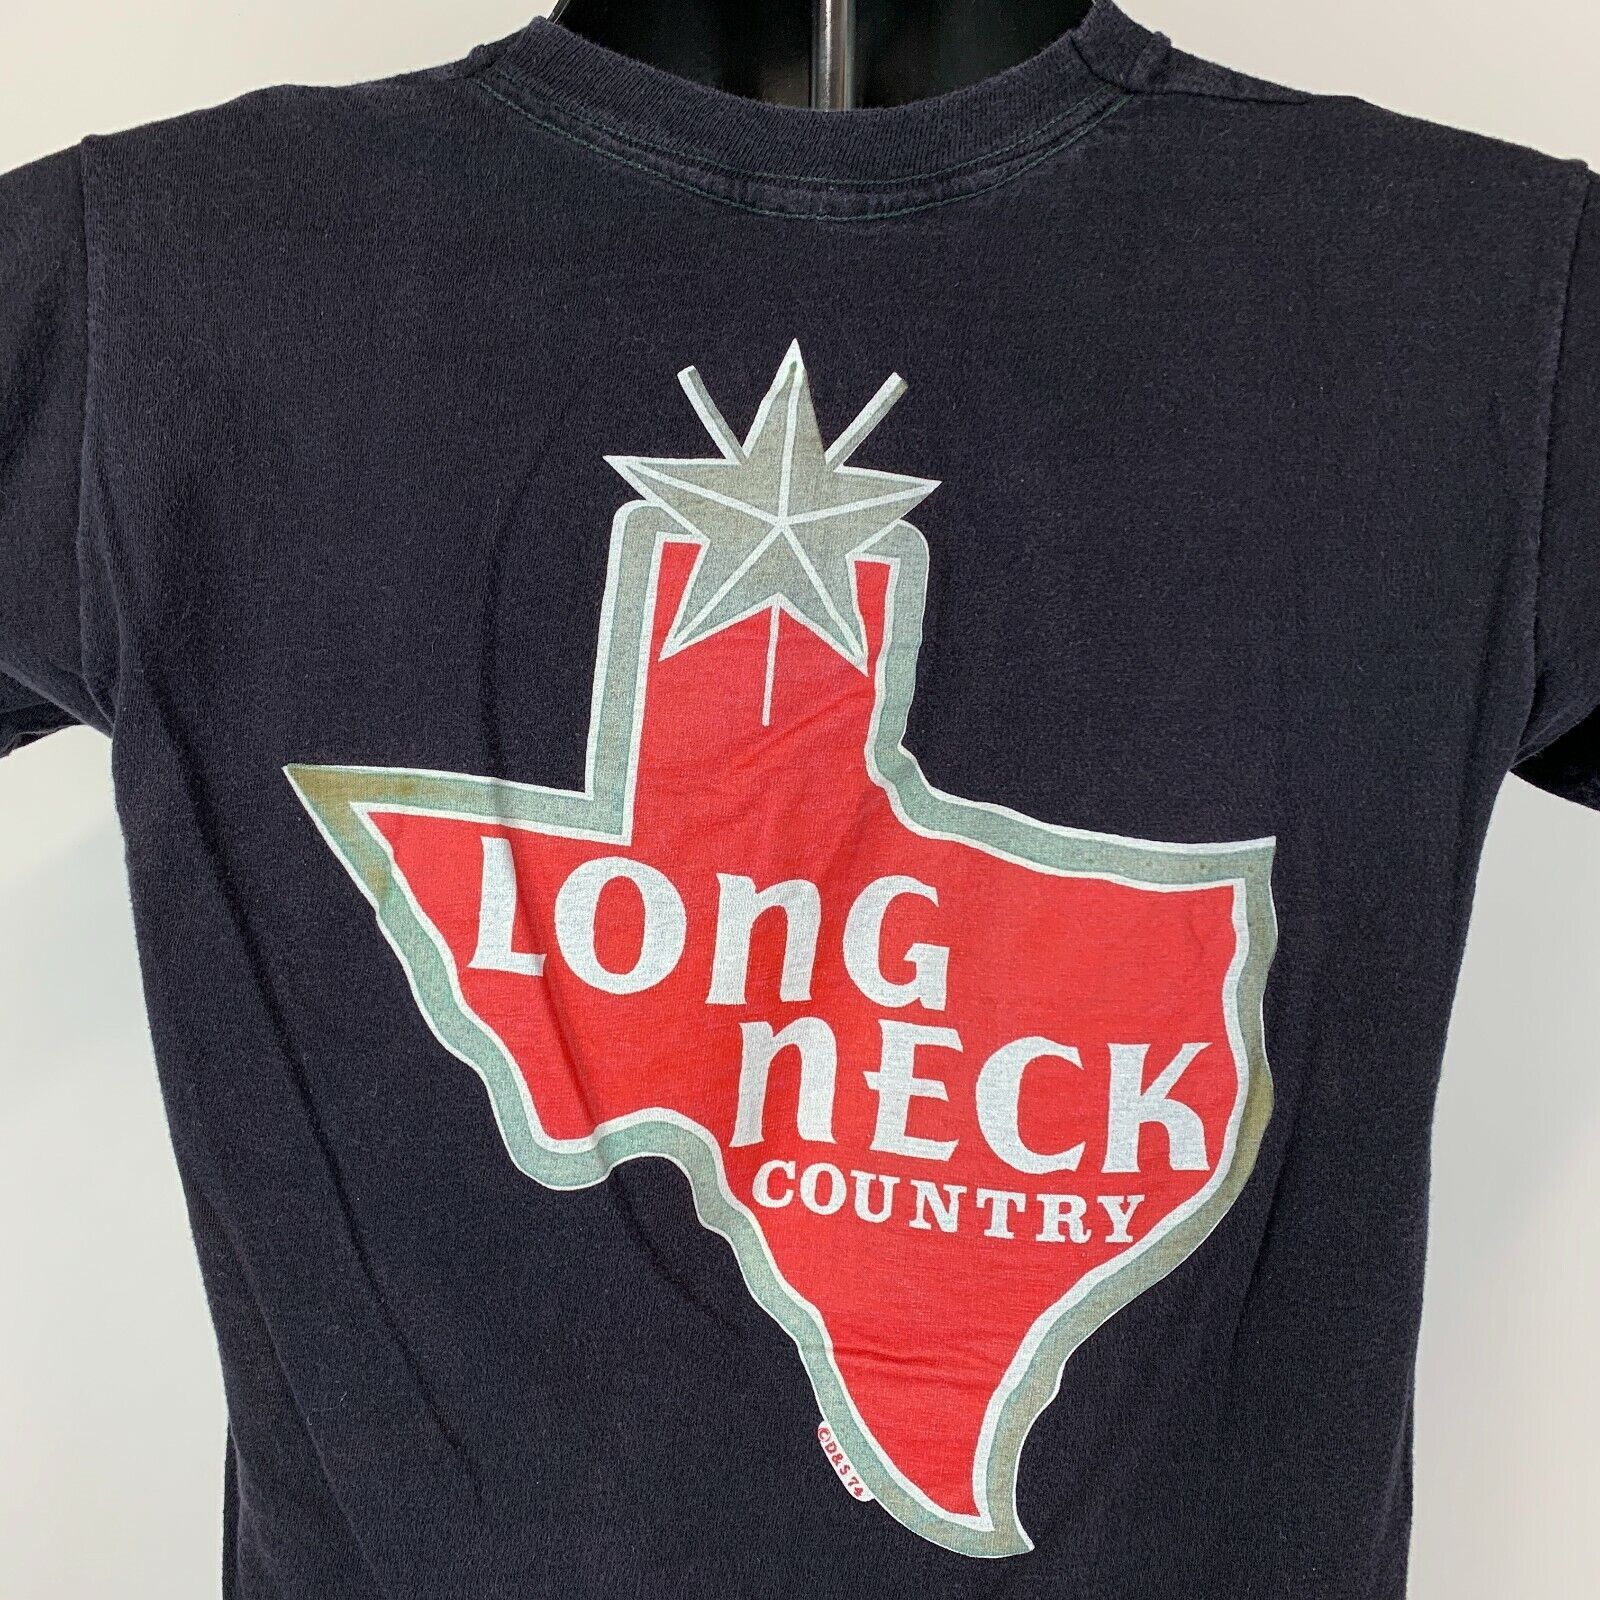 Vintage Willie Nelson Lone Star Beer Vintage 70s T Shirt Small 1974 Size US S / EU 44-46 / 1 - 6 Thumbnail